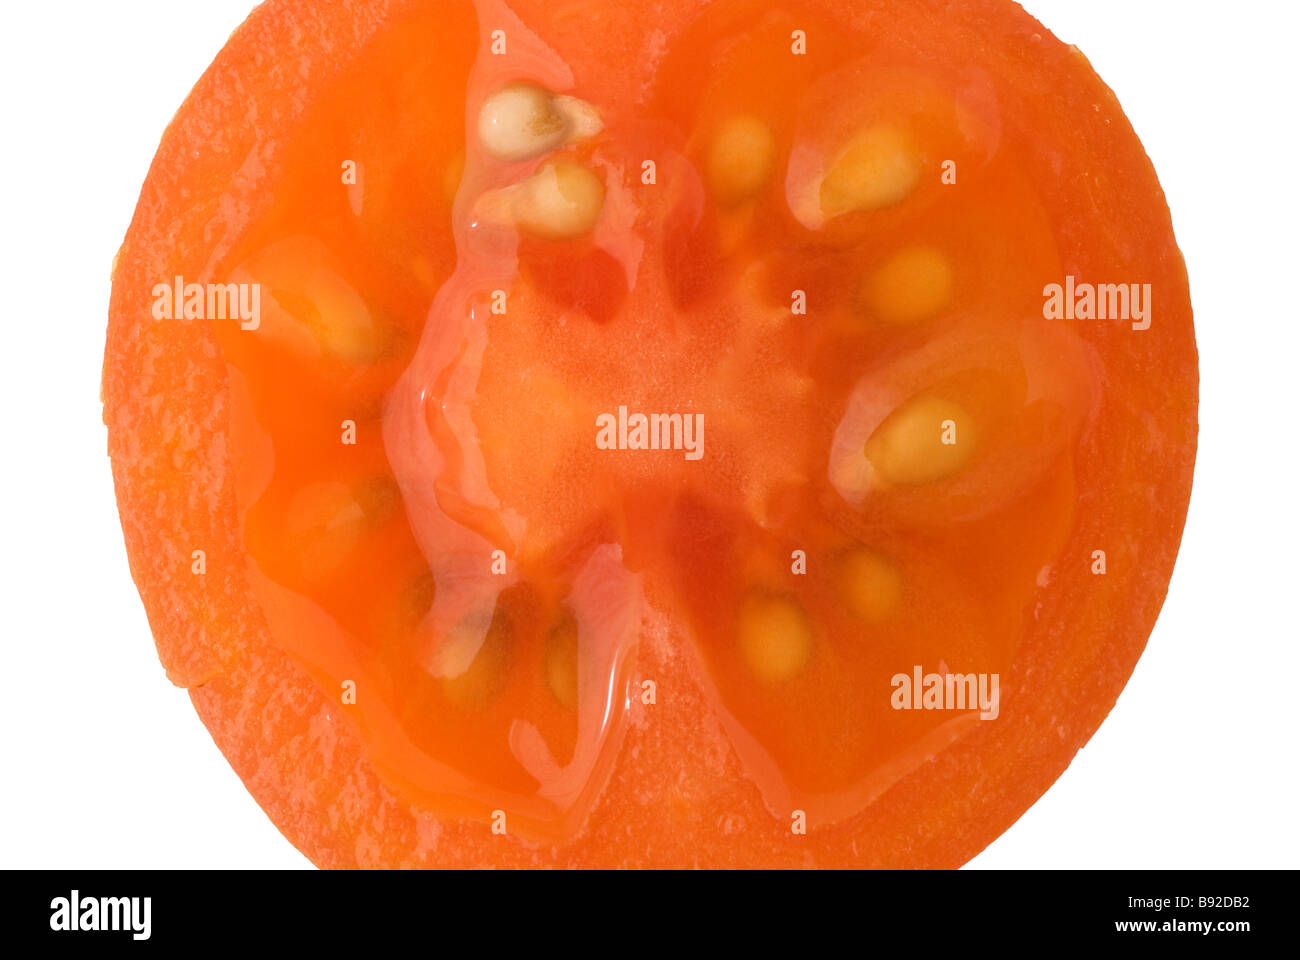 Baby tomato cut out Stock Photo